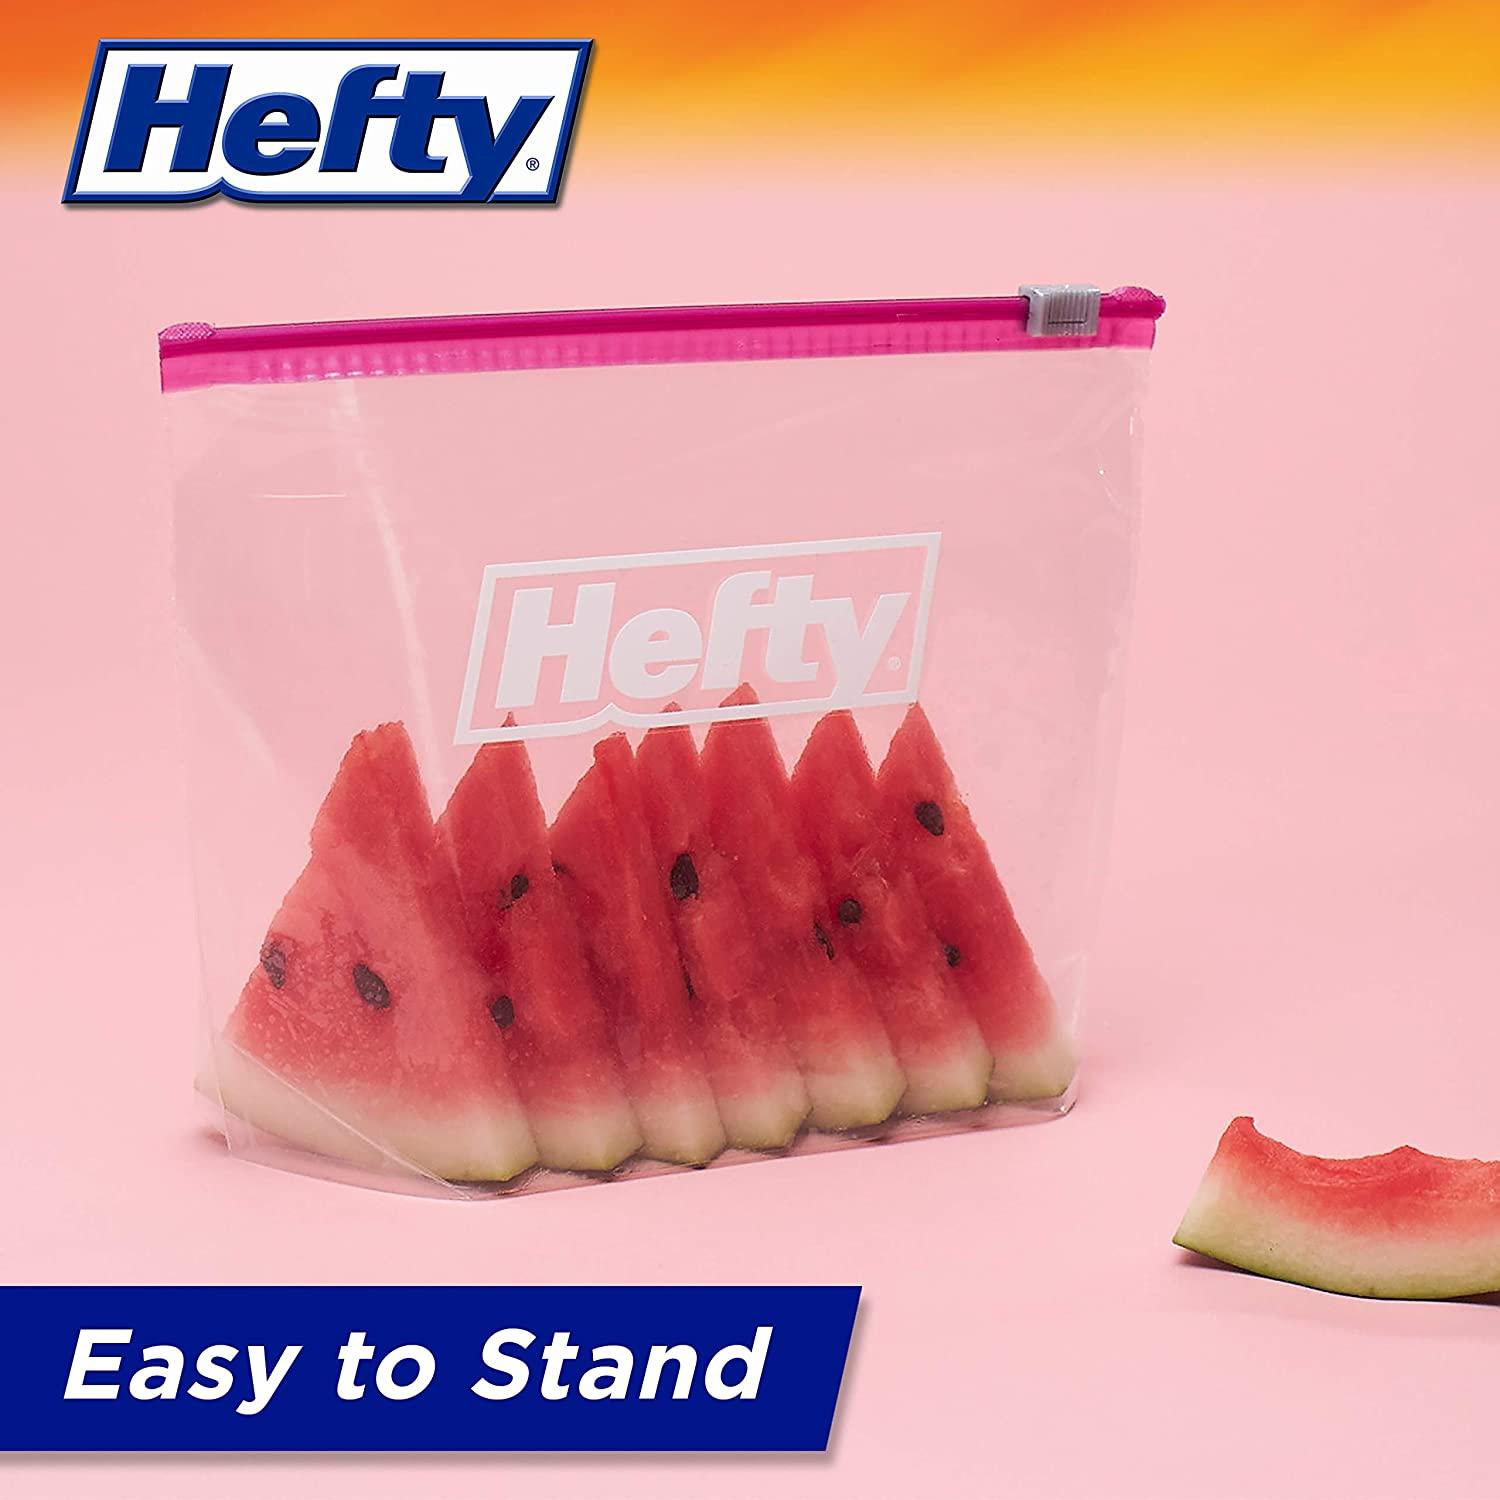  Hefty Slider Storage Bags, Gallon Size, 30 Count (Pack